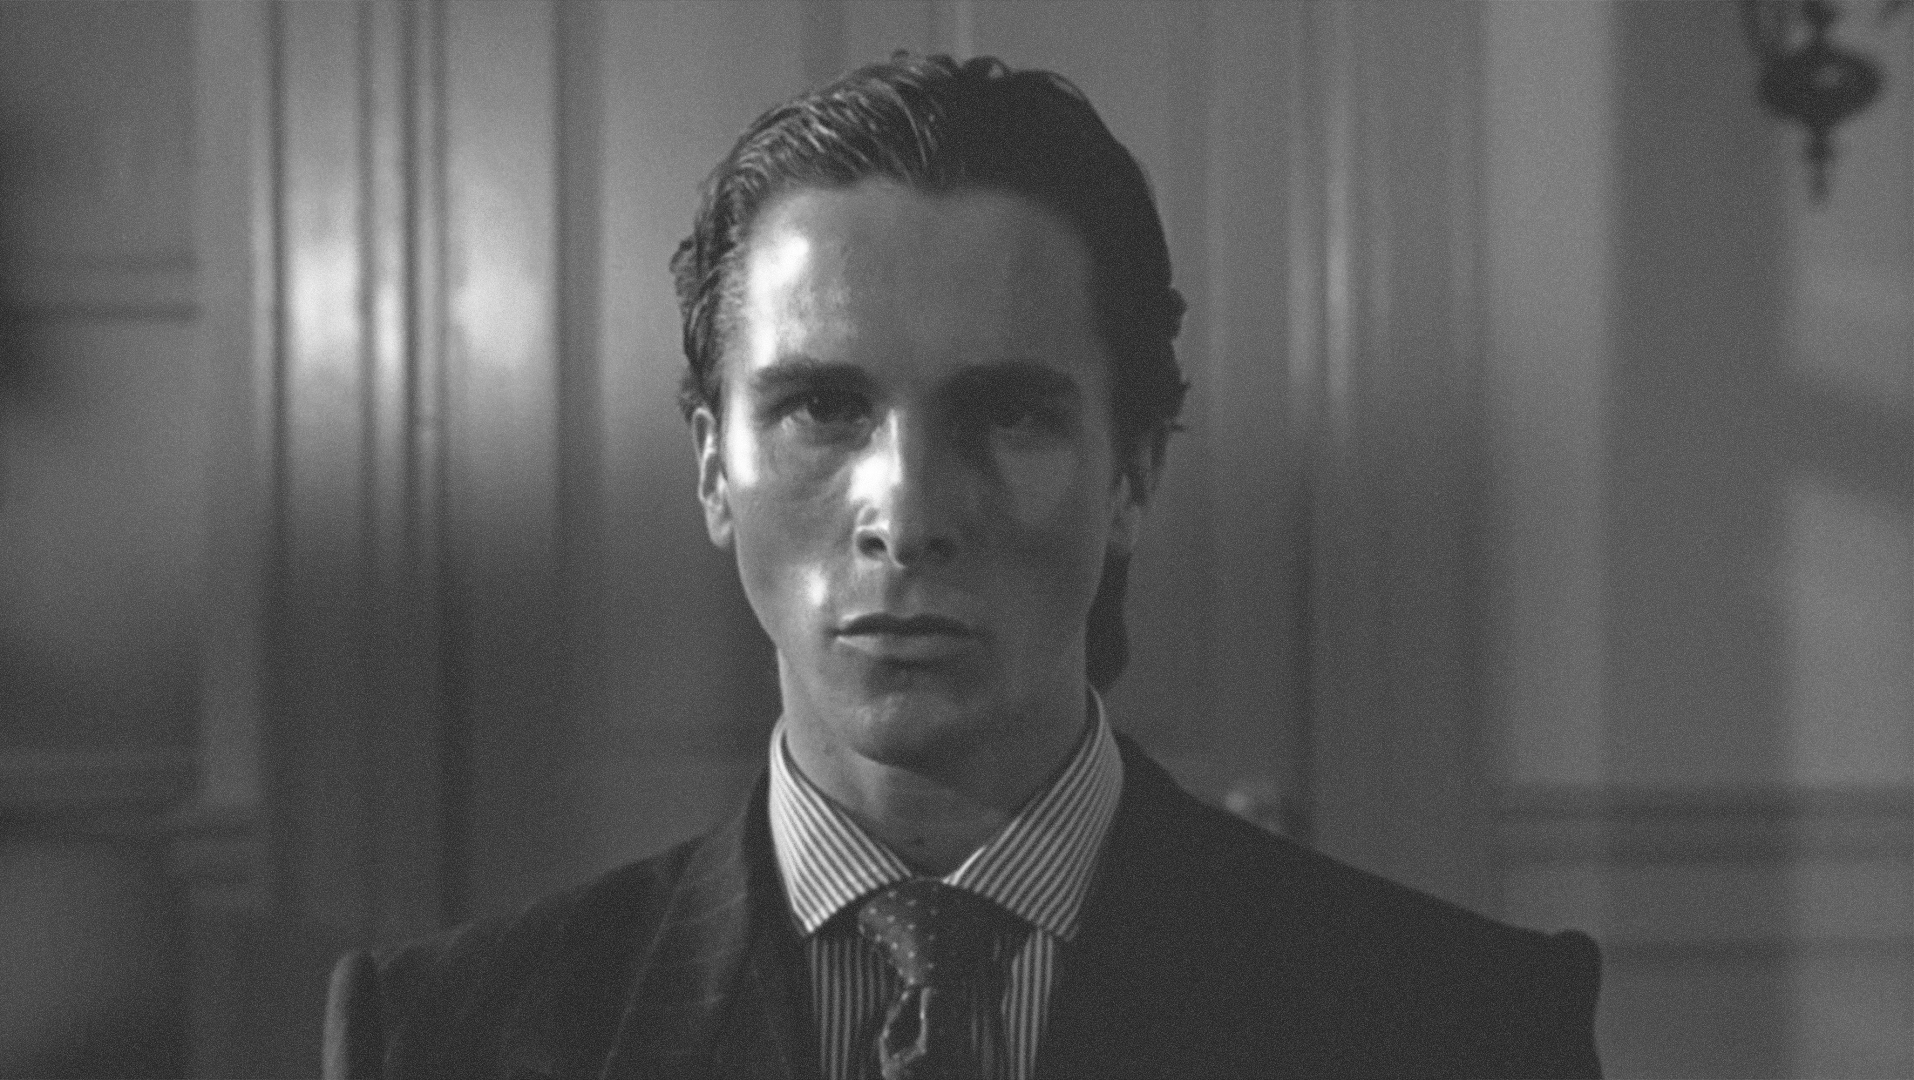 Christian Bale Monochrome Noise American Psycho People Patrick Bateman Actor Movies Movie Characters 1914x1080